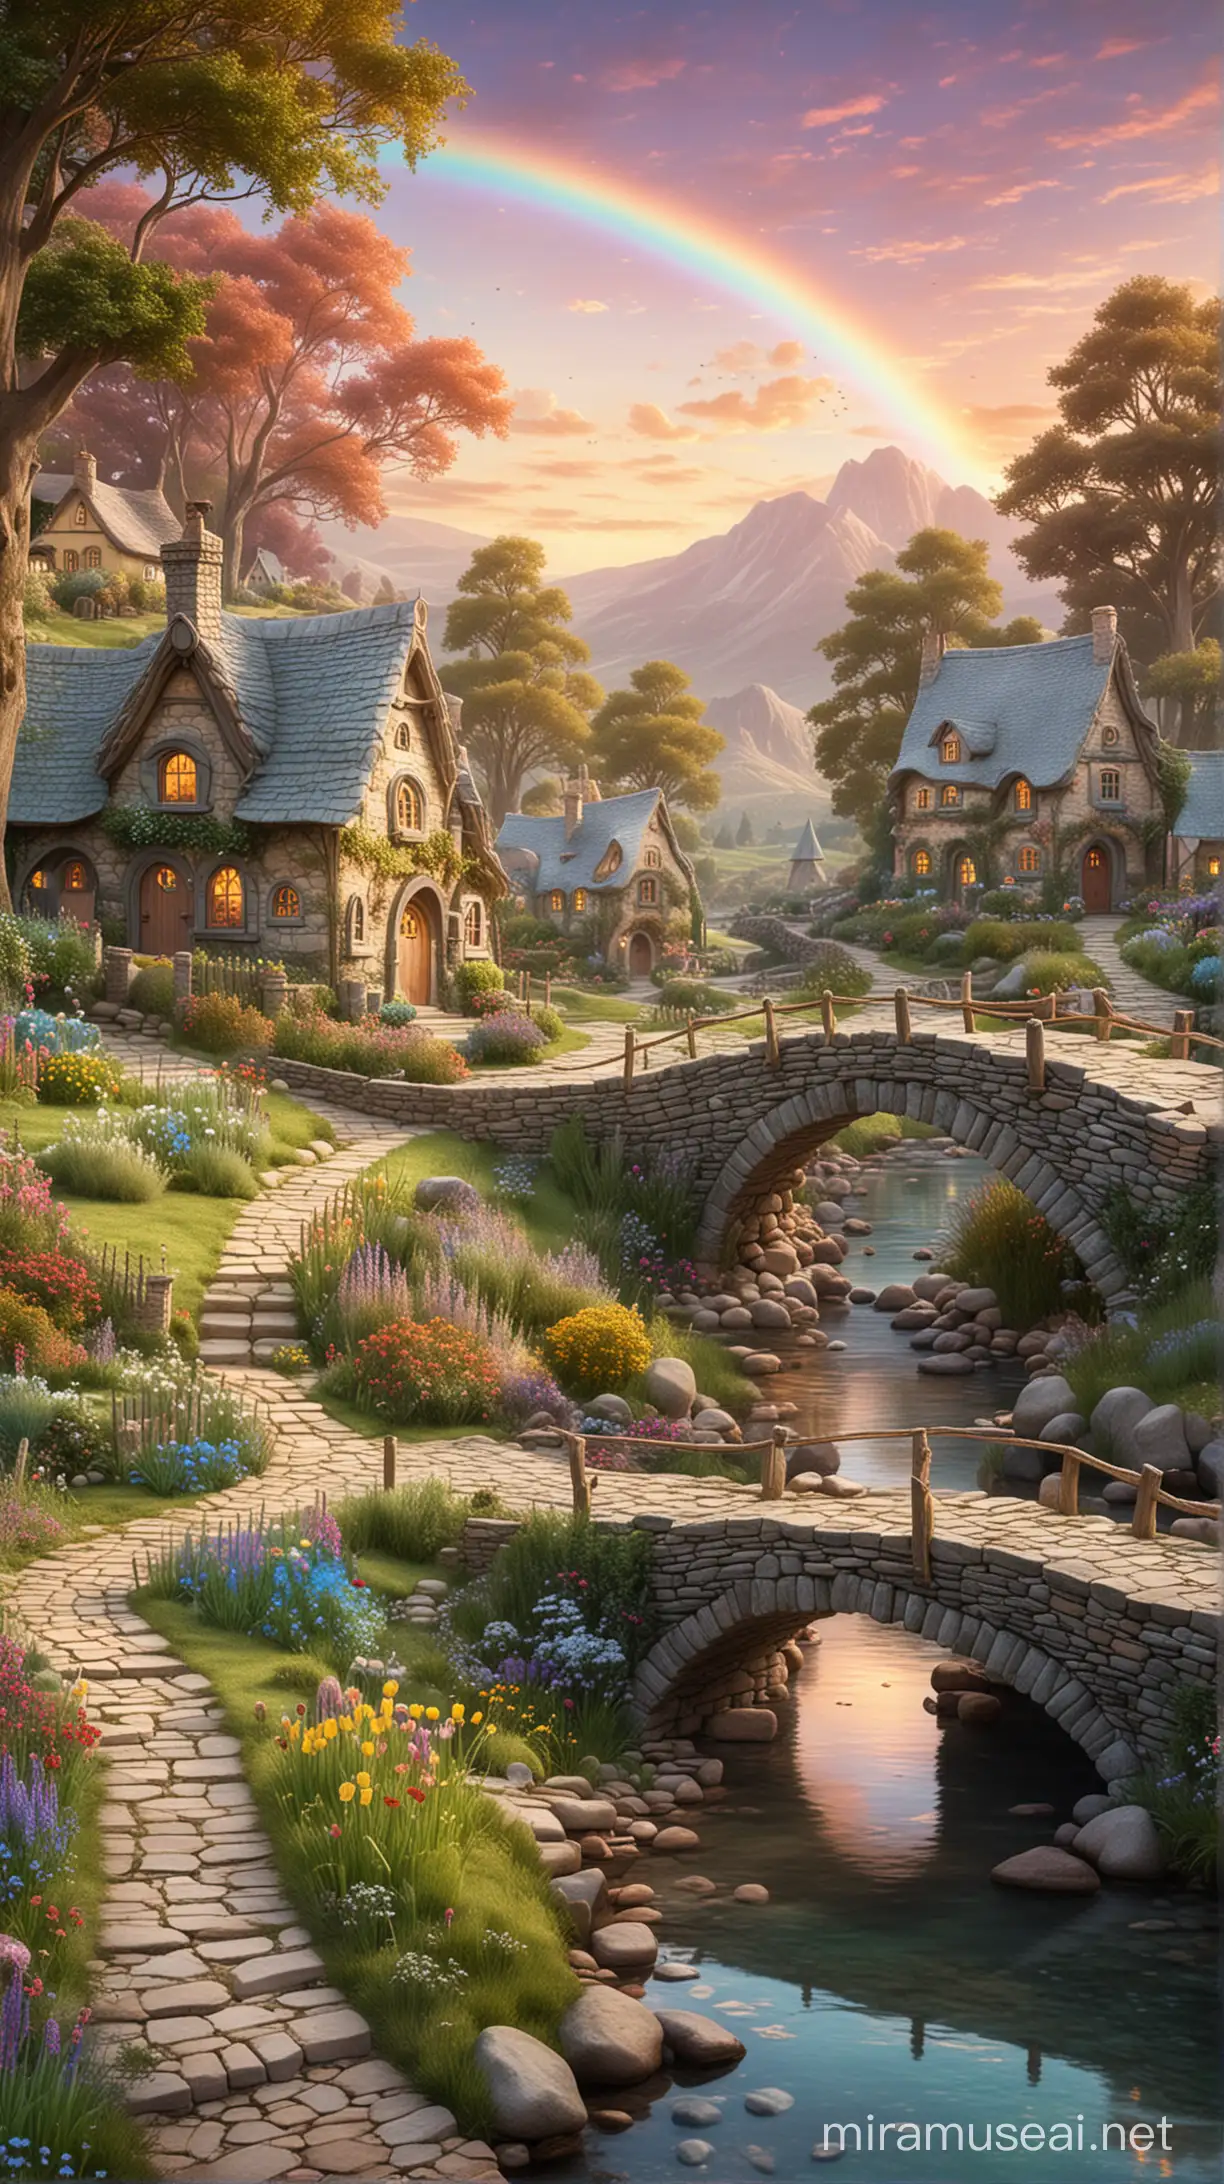 Whimsical Landscape of a fairy village  in the shire. with a pastel rainbow in the background and fantasy cottages. With a stone path and a stone bridge going over a river in the foreground.
